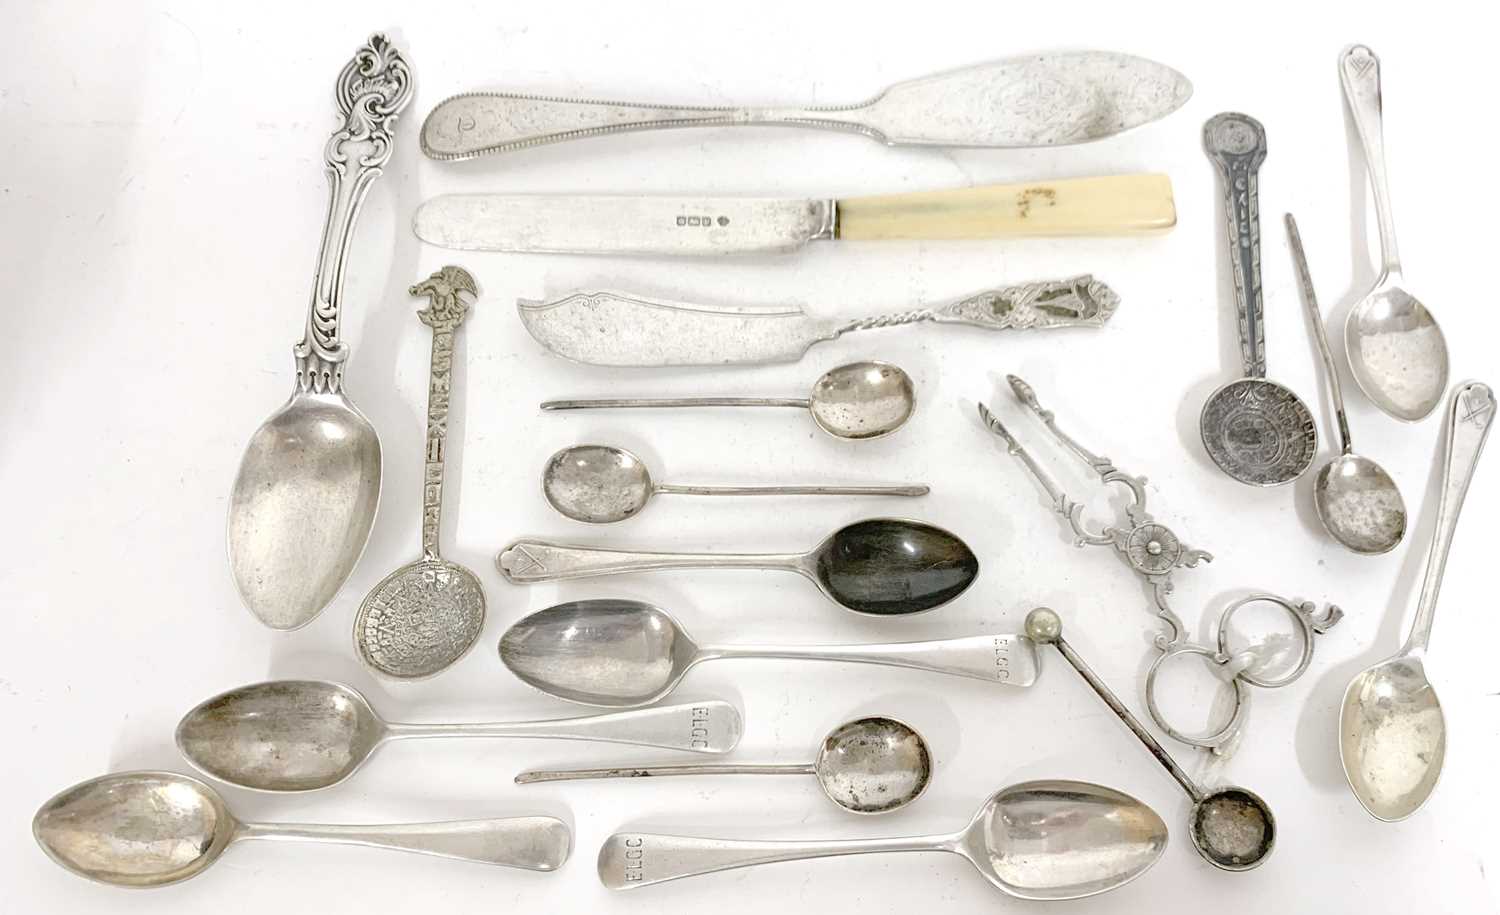 Mixed Lot: Victorian silver butter knife and ornate silver dessert spoon, six silver tea spoons, - Image 2 of 2